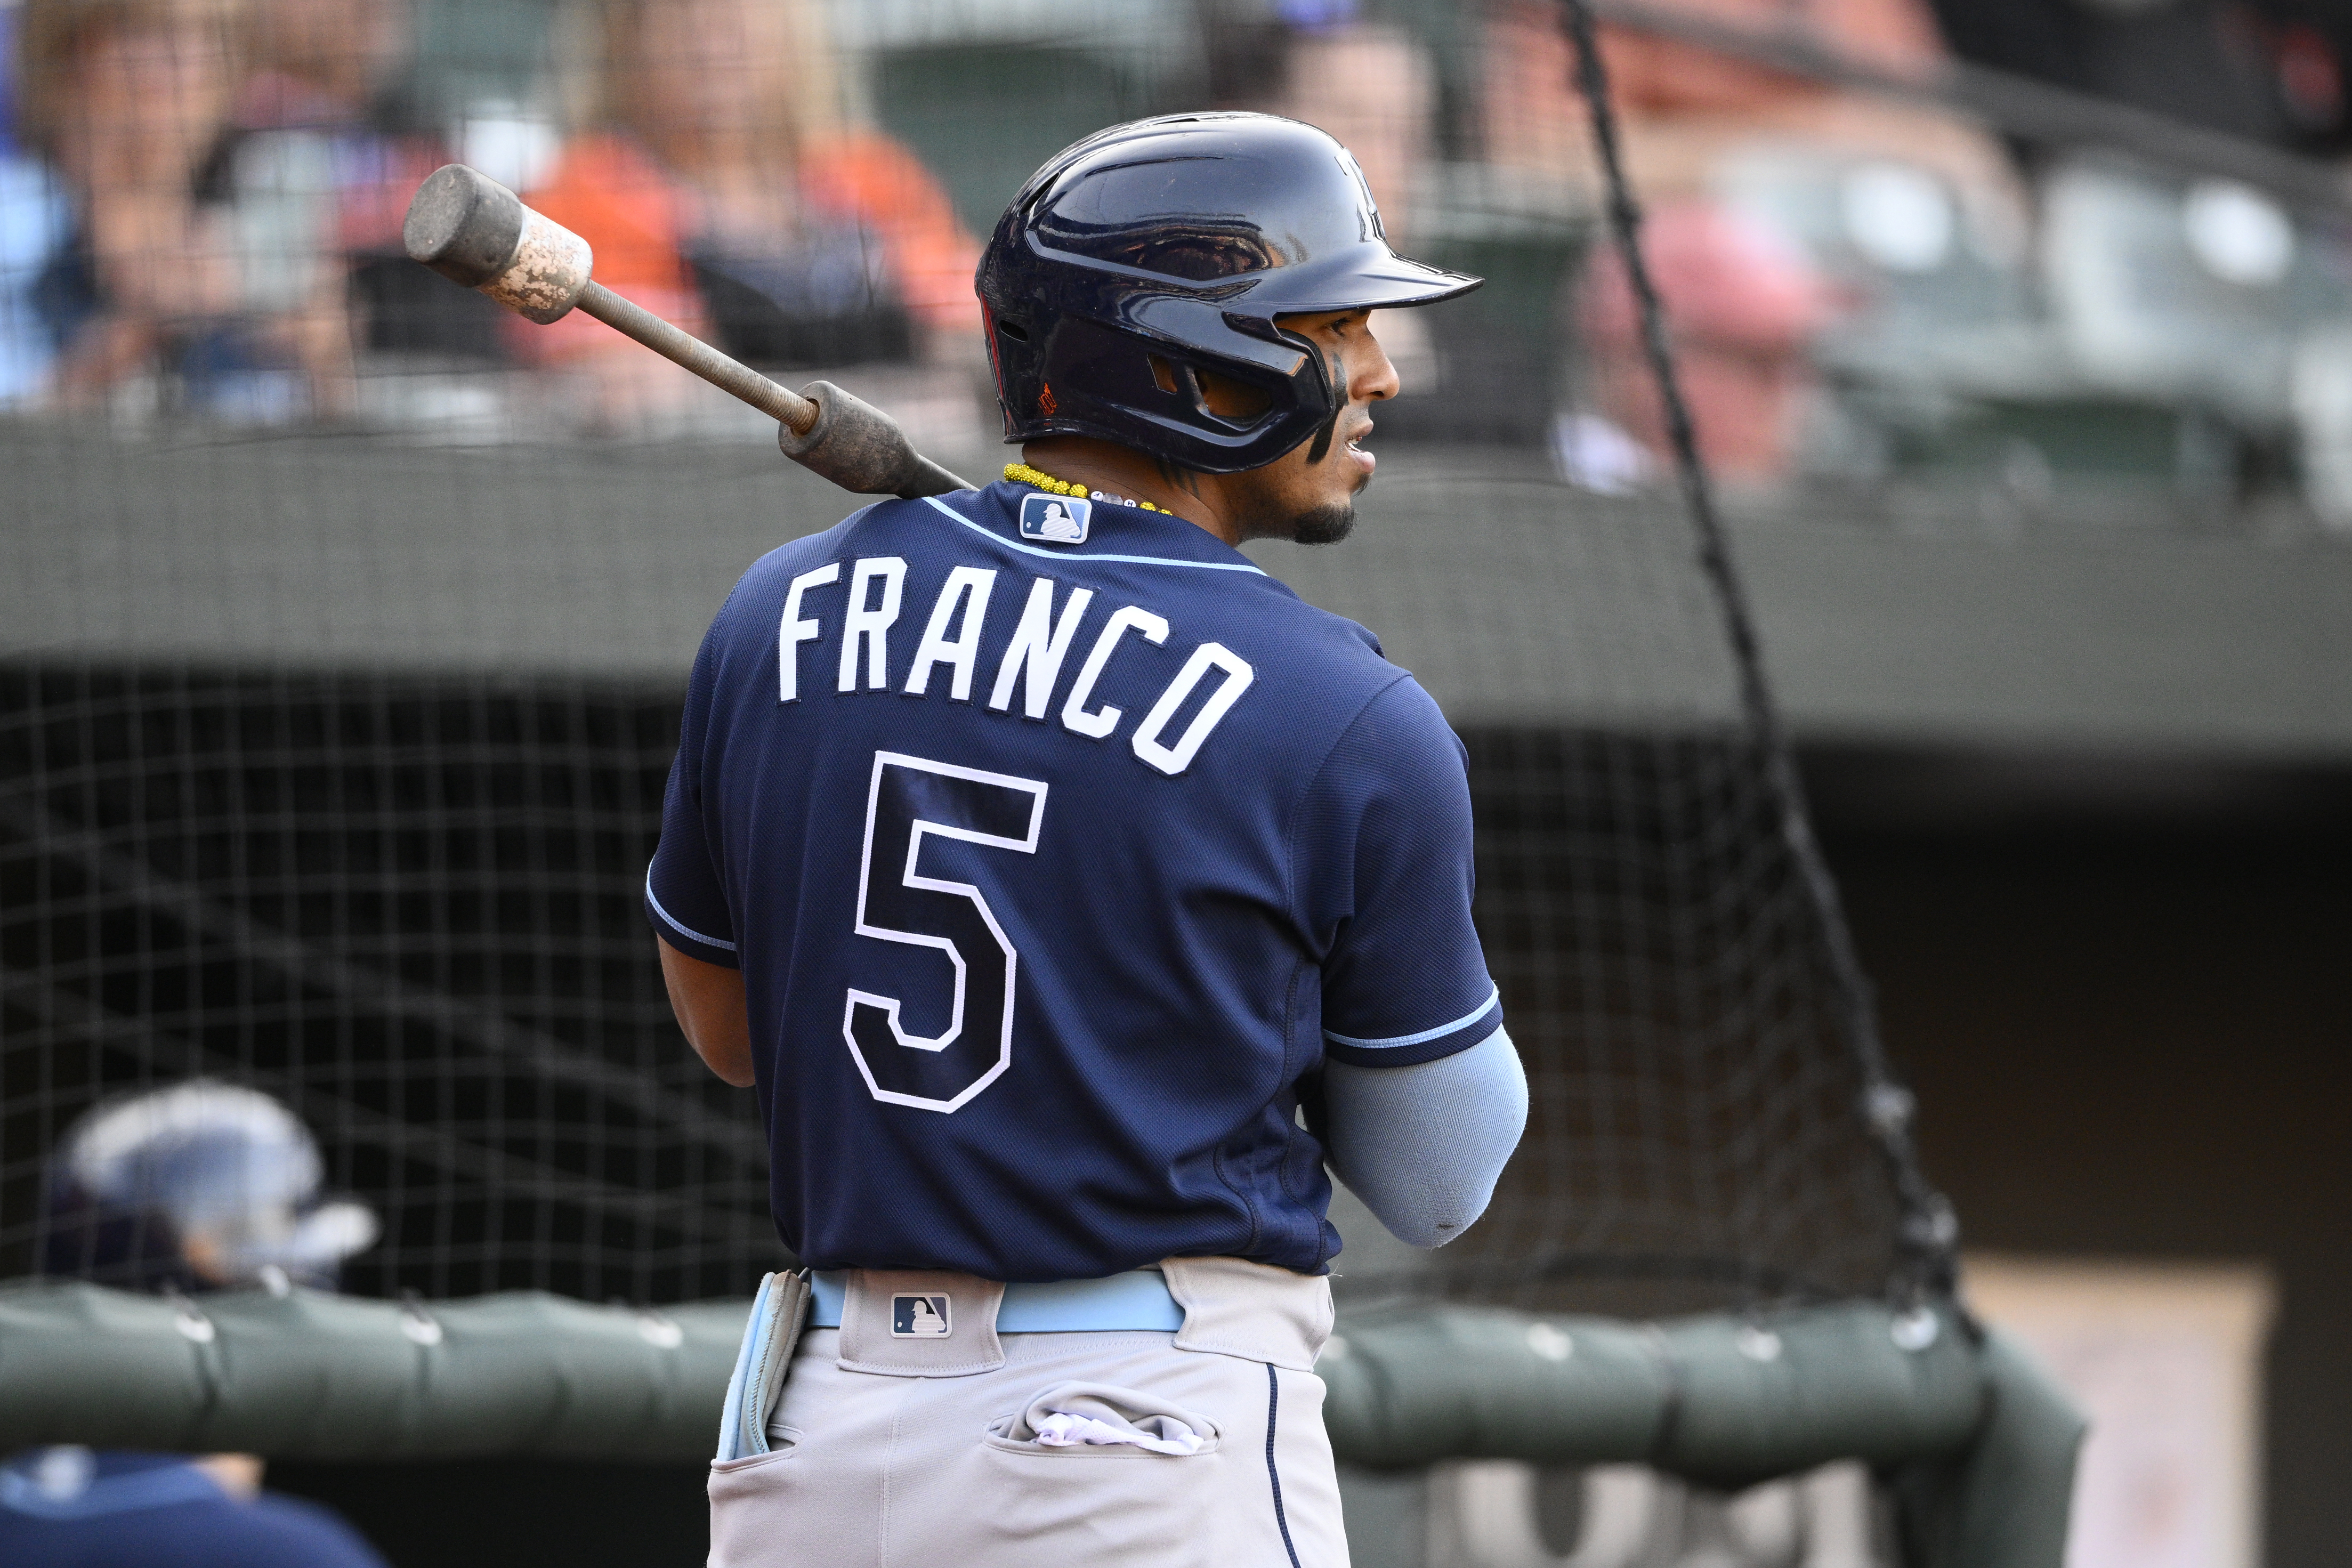 Rays Place Wander Franco on MLB Restricted List, Sports-illustrated